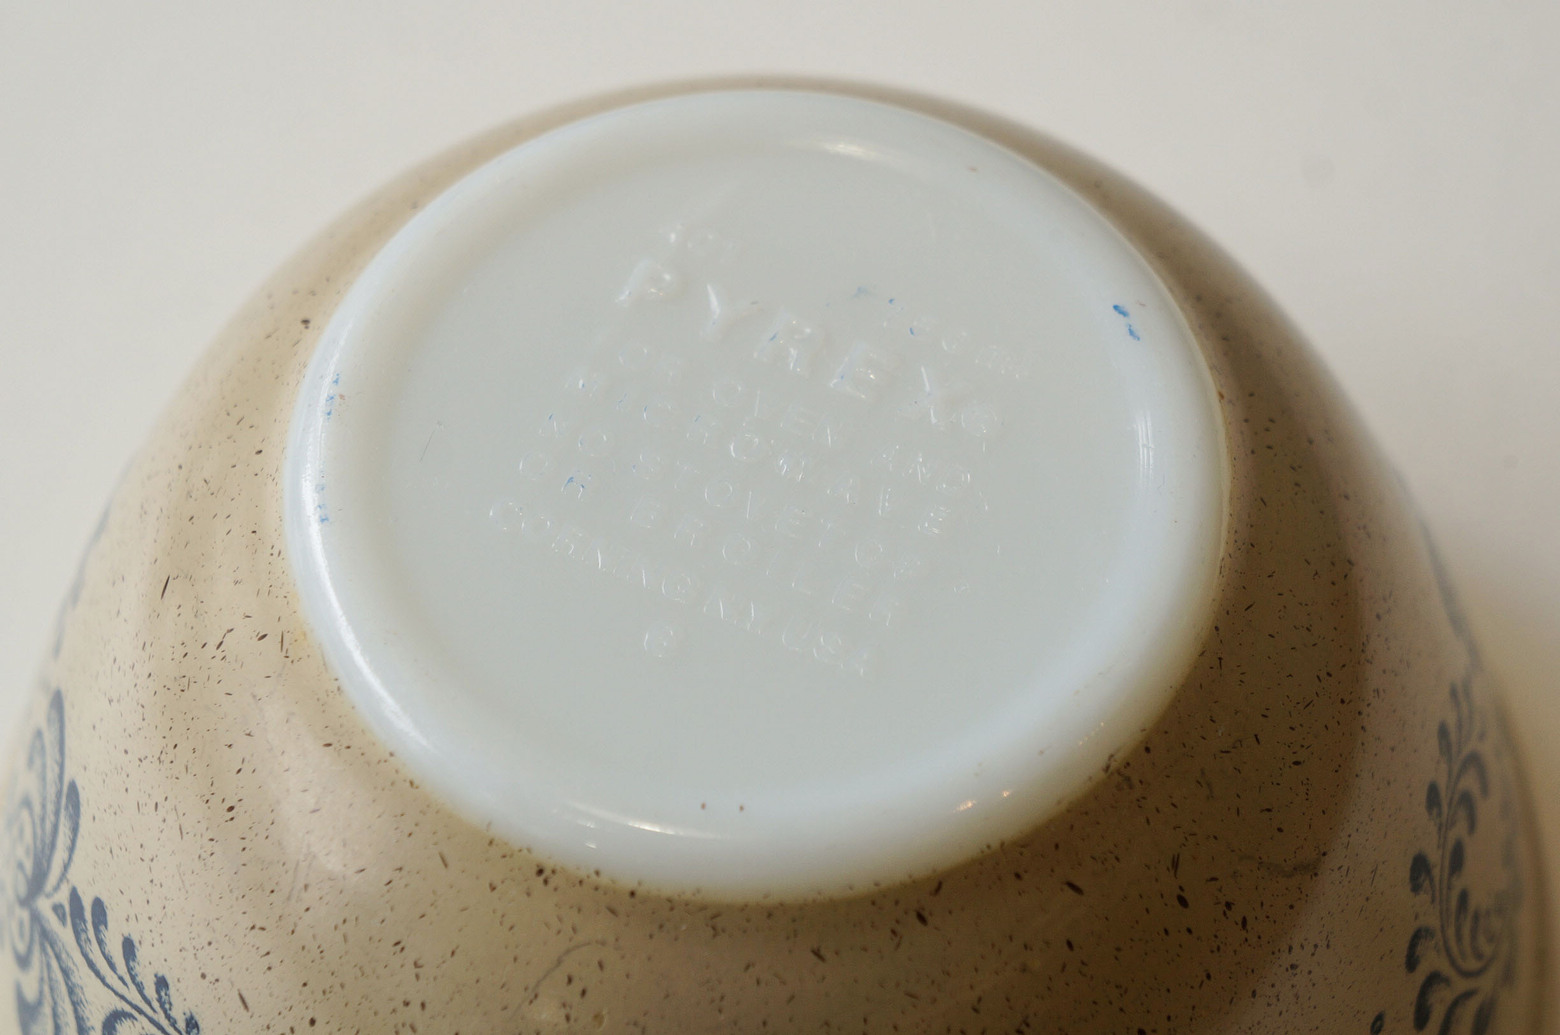 Old PYREX Mixing Bowl Homestead Ssize/オールドパイレックス ミキシングボウル アメリカヴィンテージ 食器 レトロ ホームステッド 1